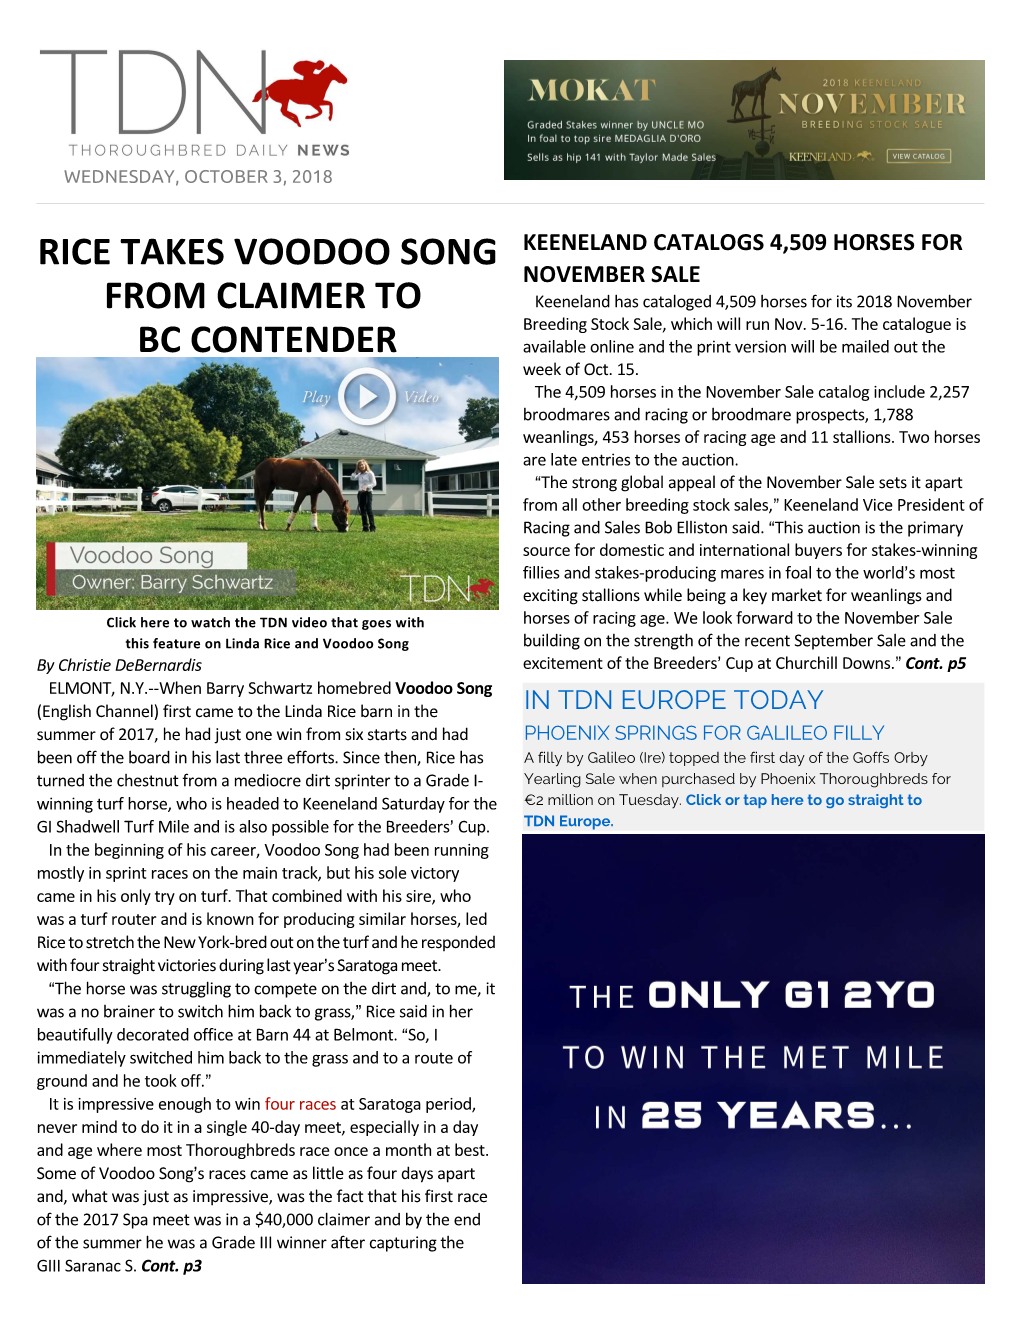 Rice Takes Voodoo Song from Claimer to BC Contender Managed to Have Something Left in the Tank